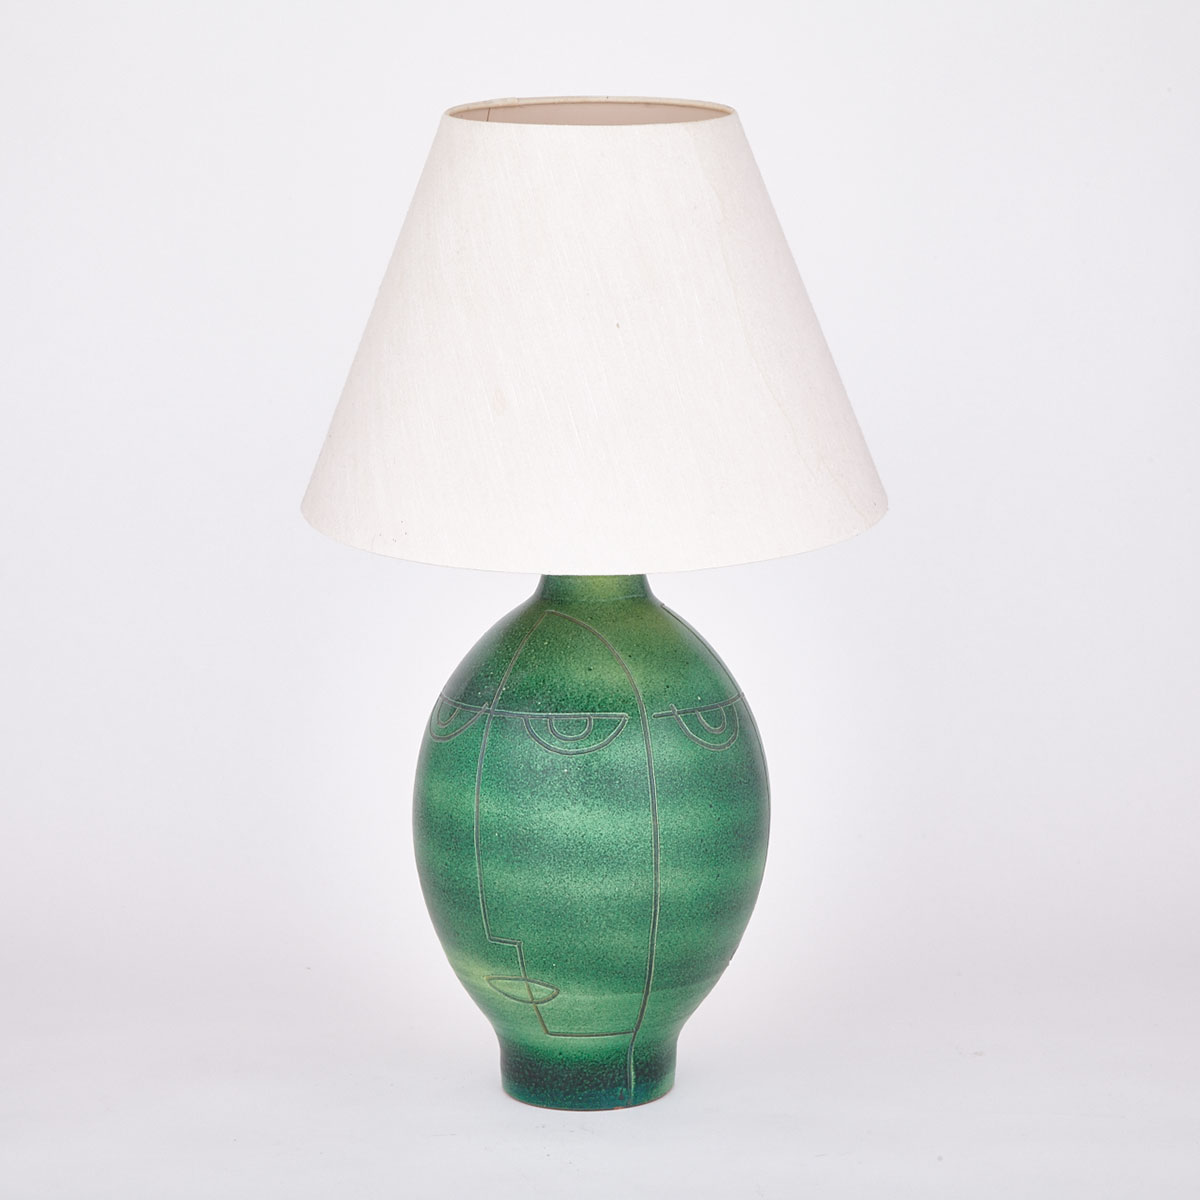 Brooklin Pottery Table Lamp, Theo and Susan Harlander, c.1960s